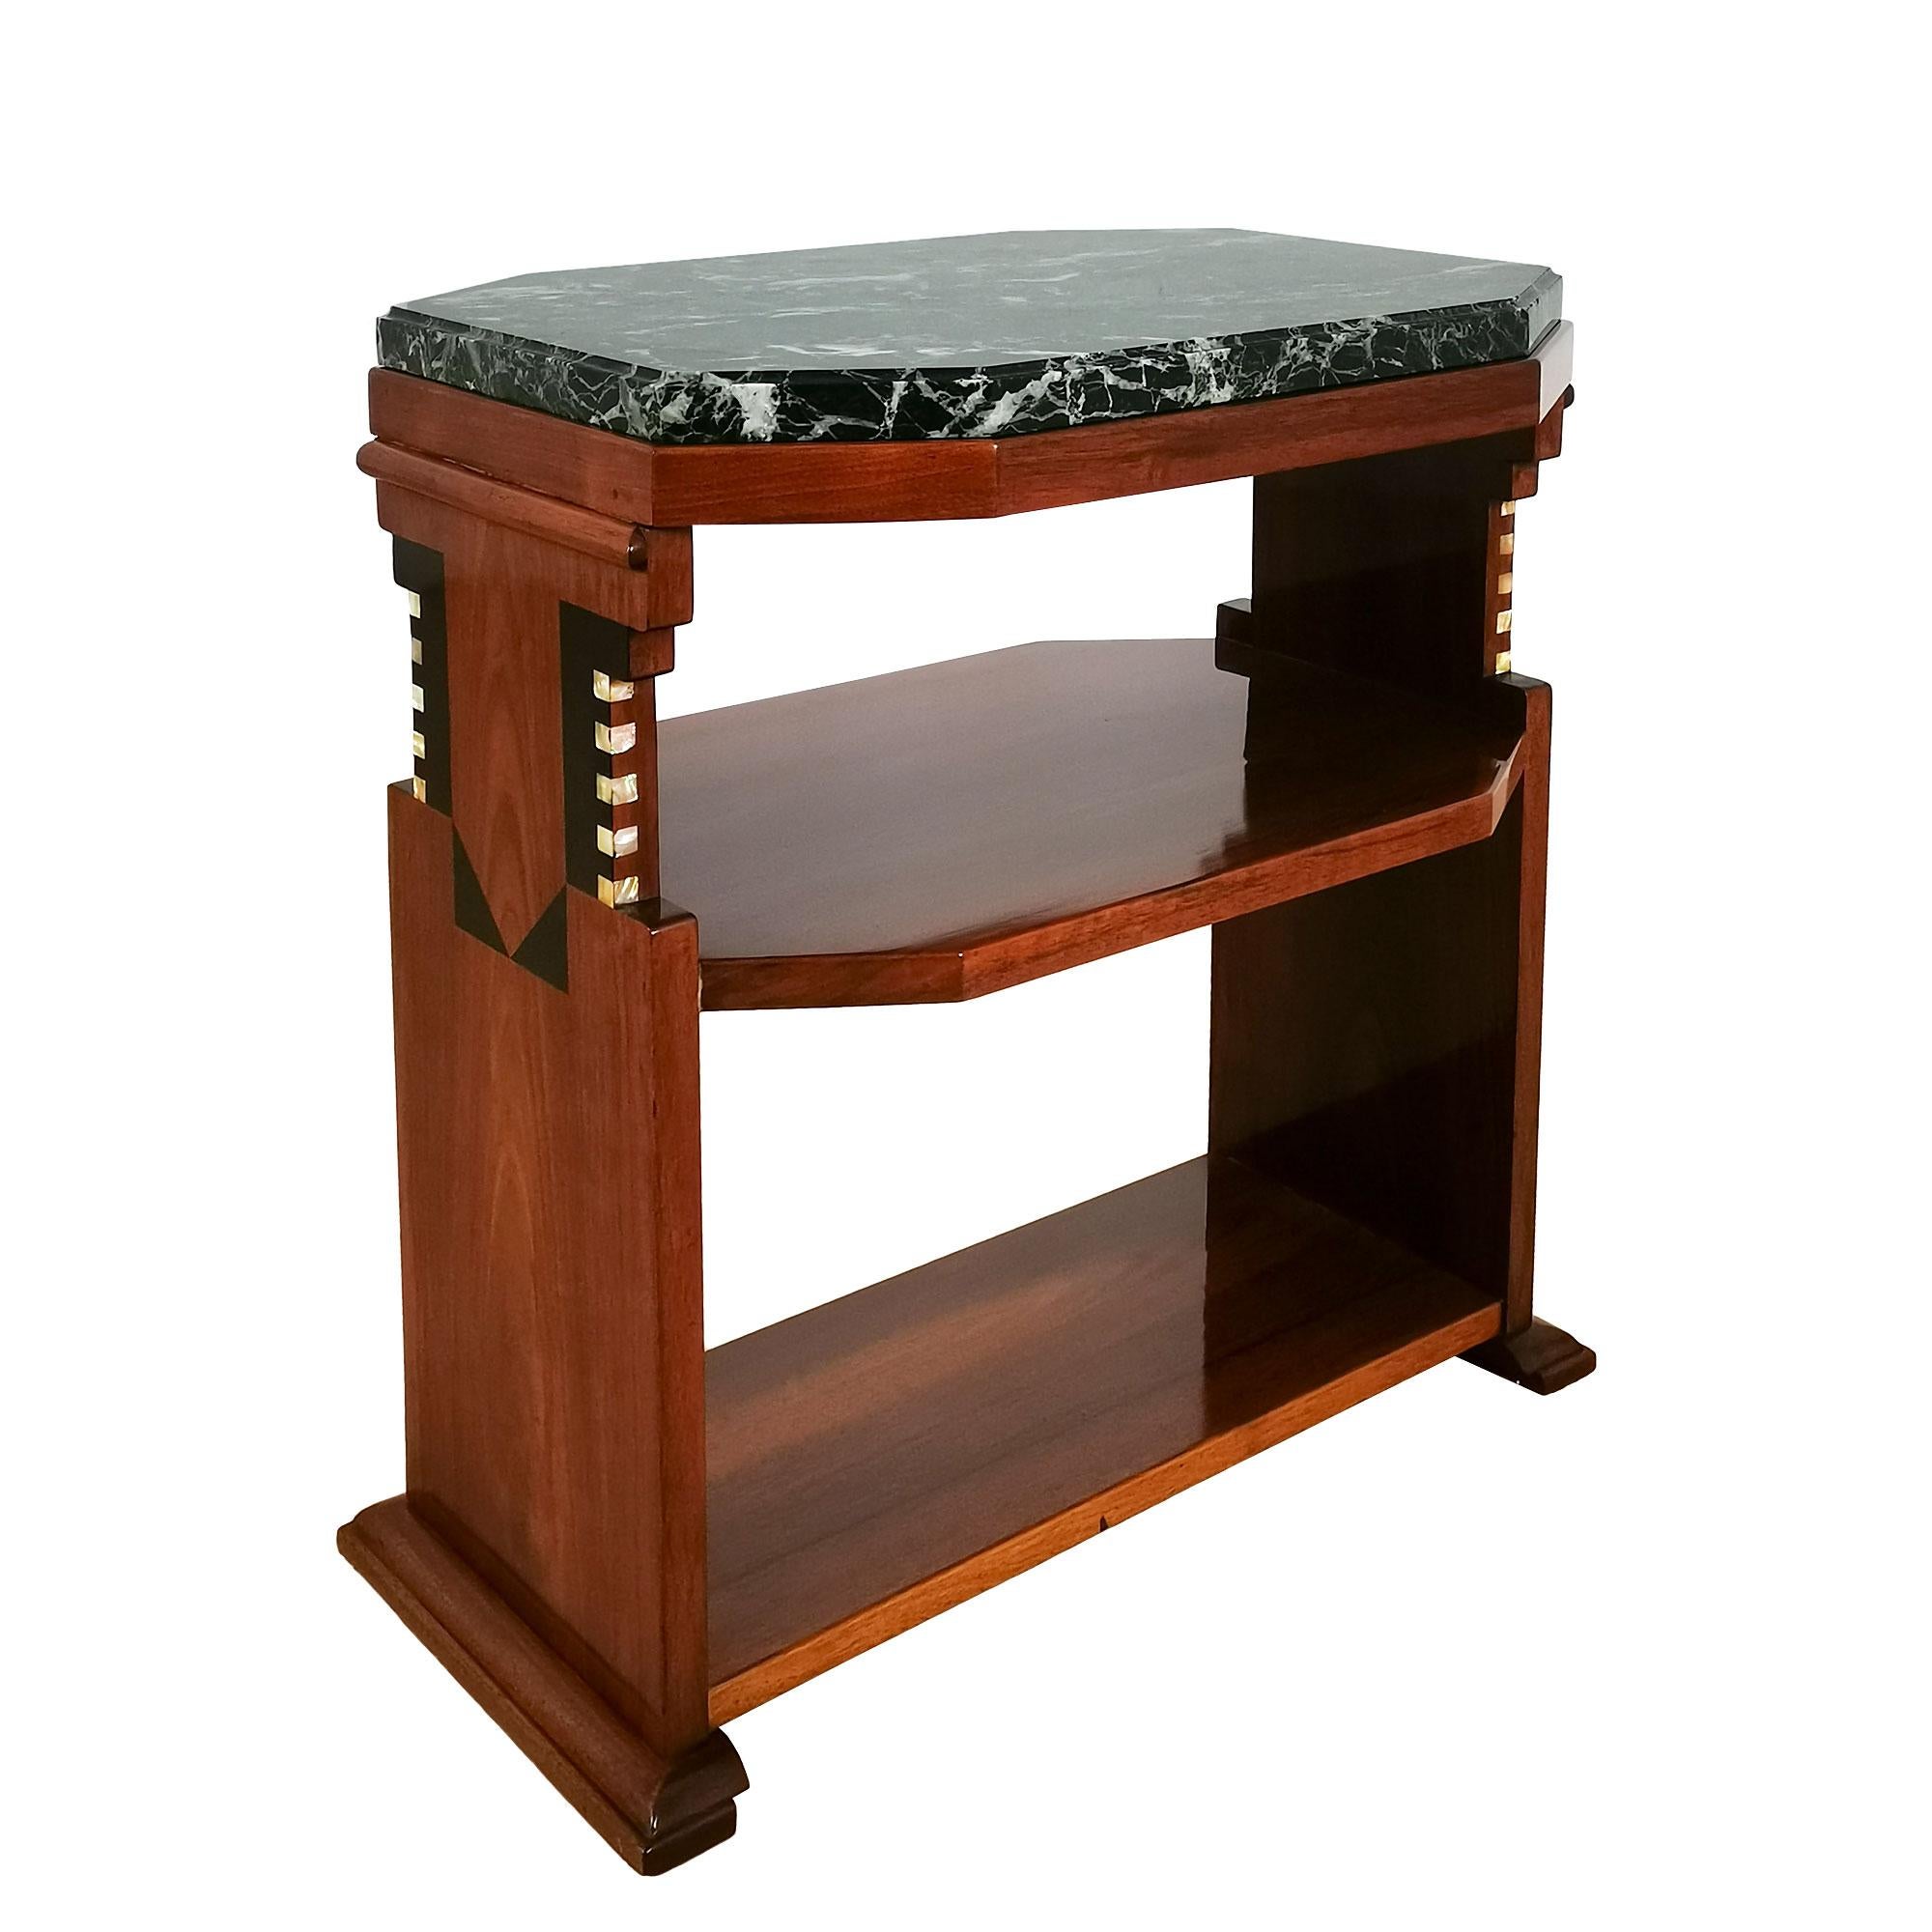 Early 20th Century 1925 Cubist Art Deco Side Table in Solid Walnut and Marble on Top - Belgium For Sale